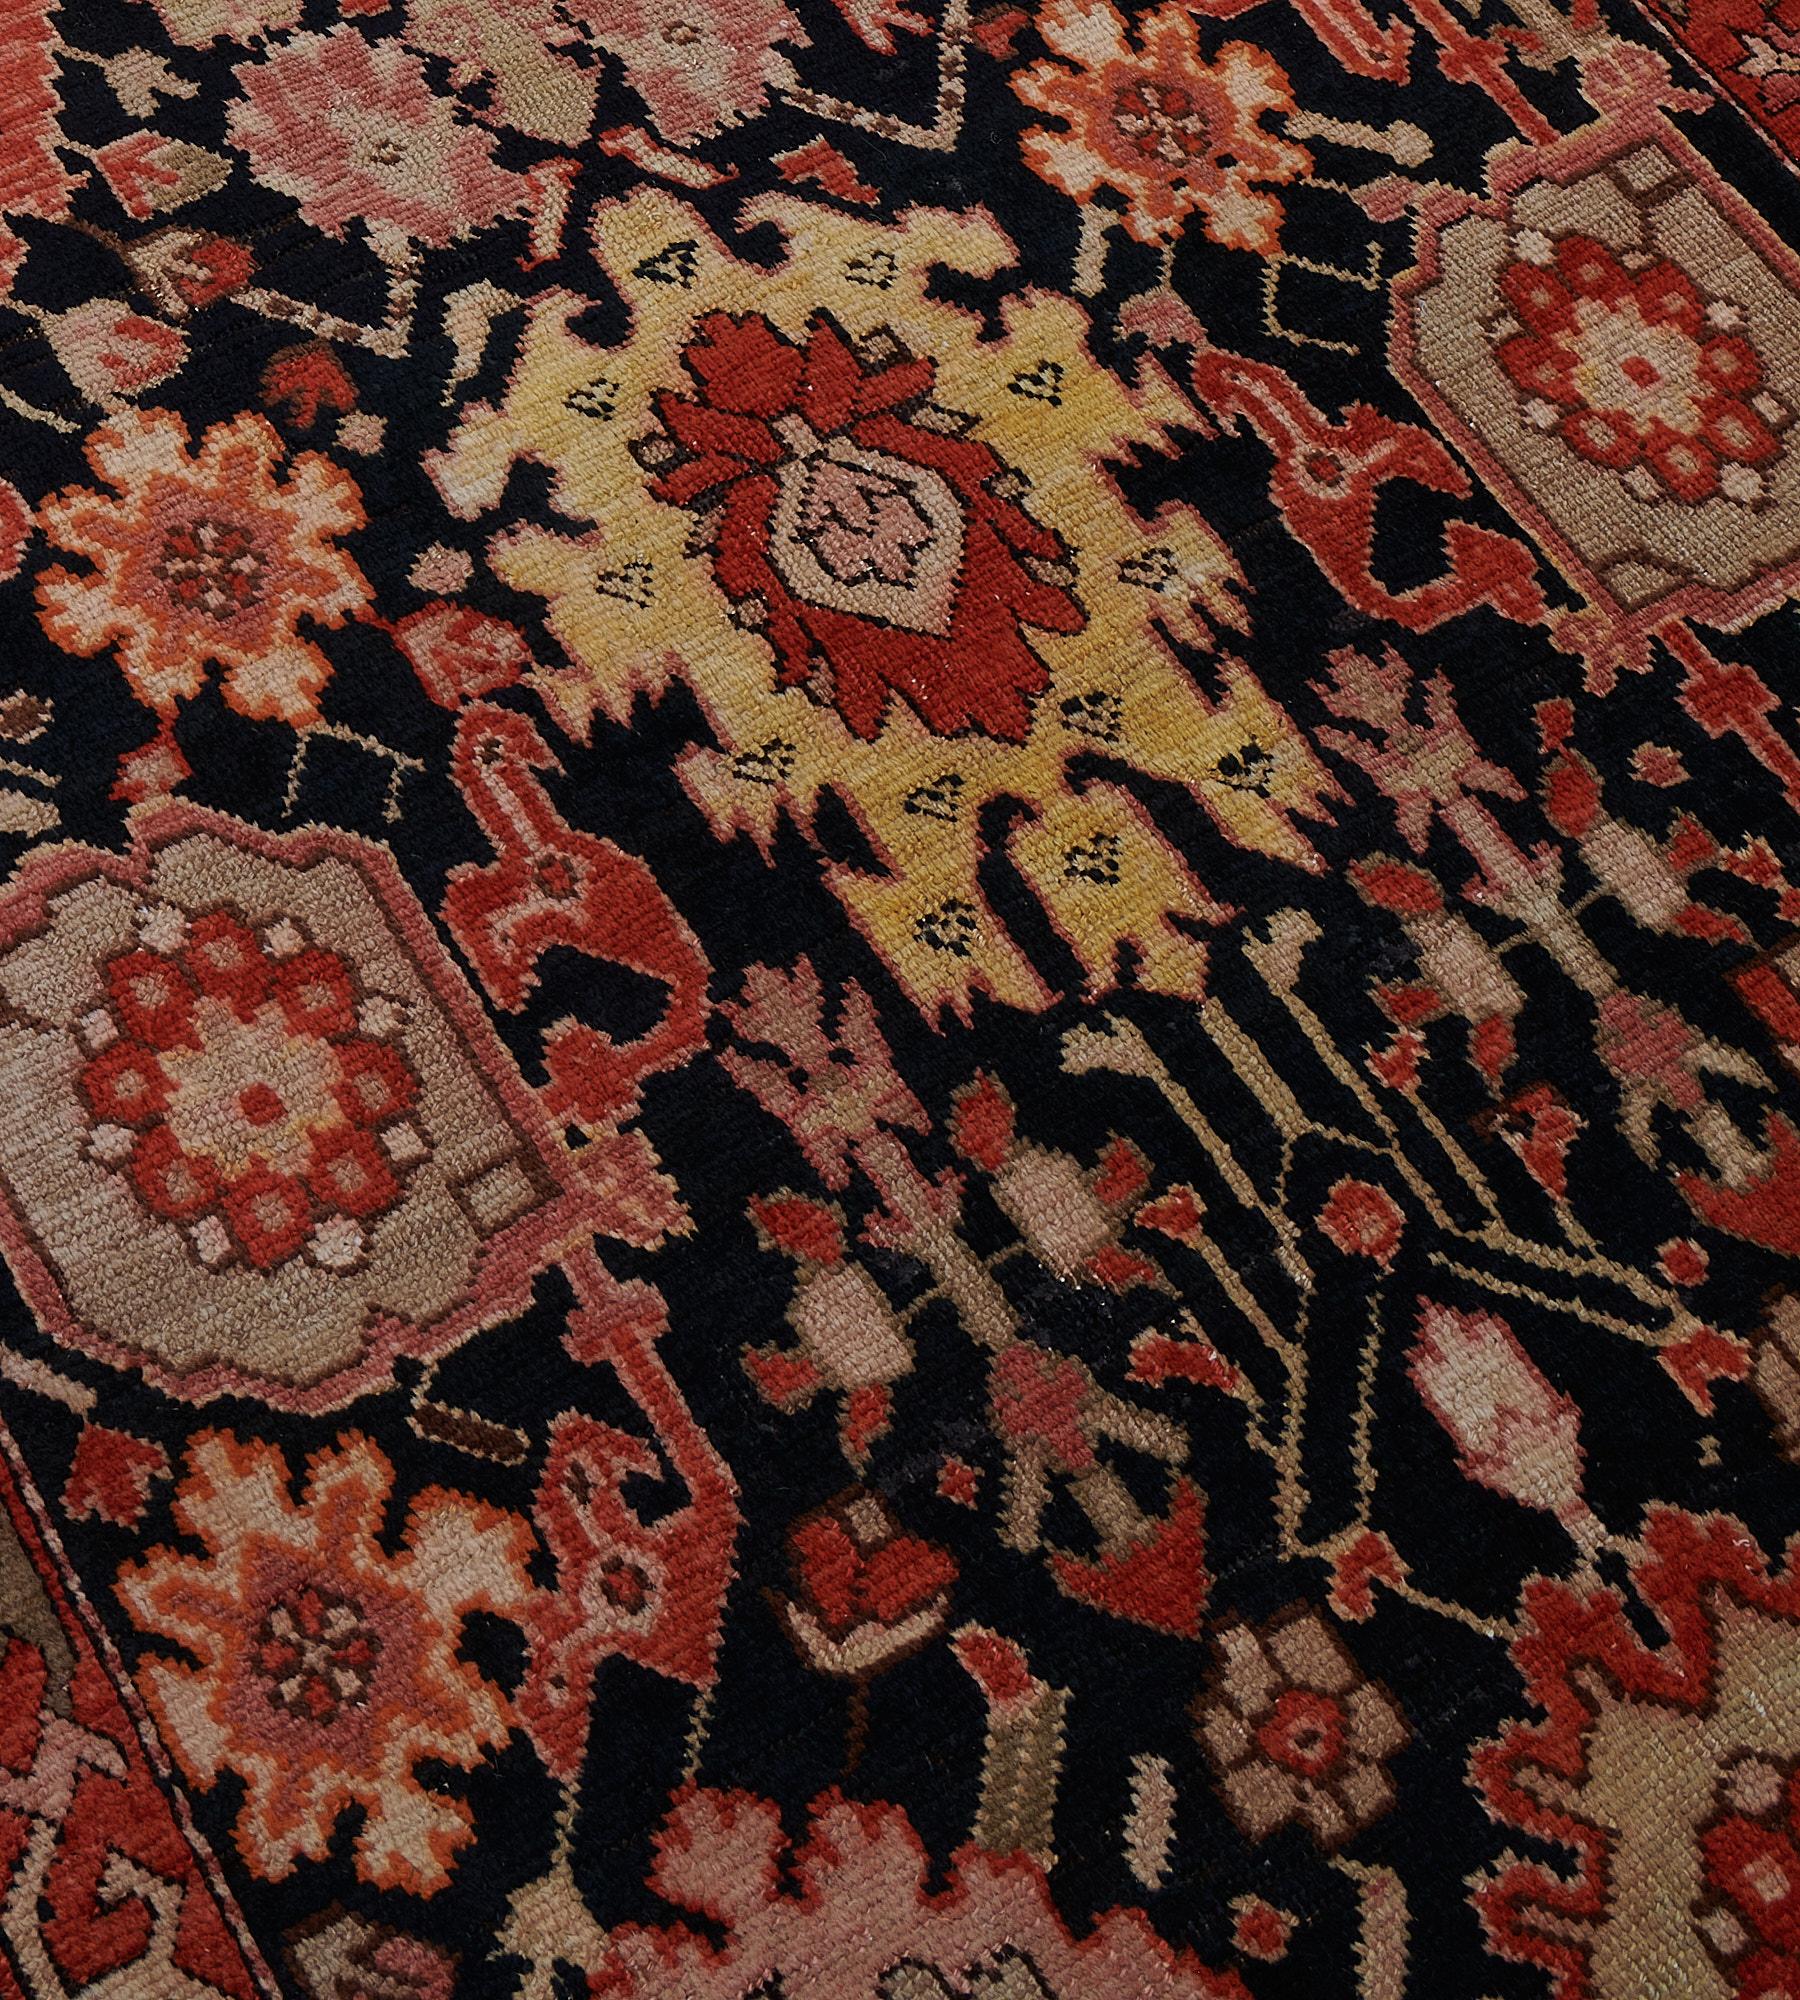 This antique Karabagh runner has a charcoal-blue field with an overall design of bold shaded pink, golden yellow, pistachio-green palmettes linked by angular flowerhead and floral vine, in a terracotta-red angular floral vine border between